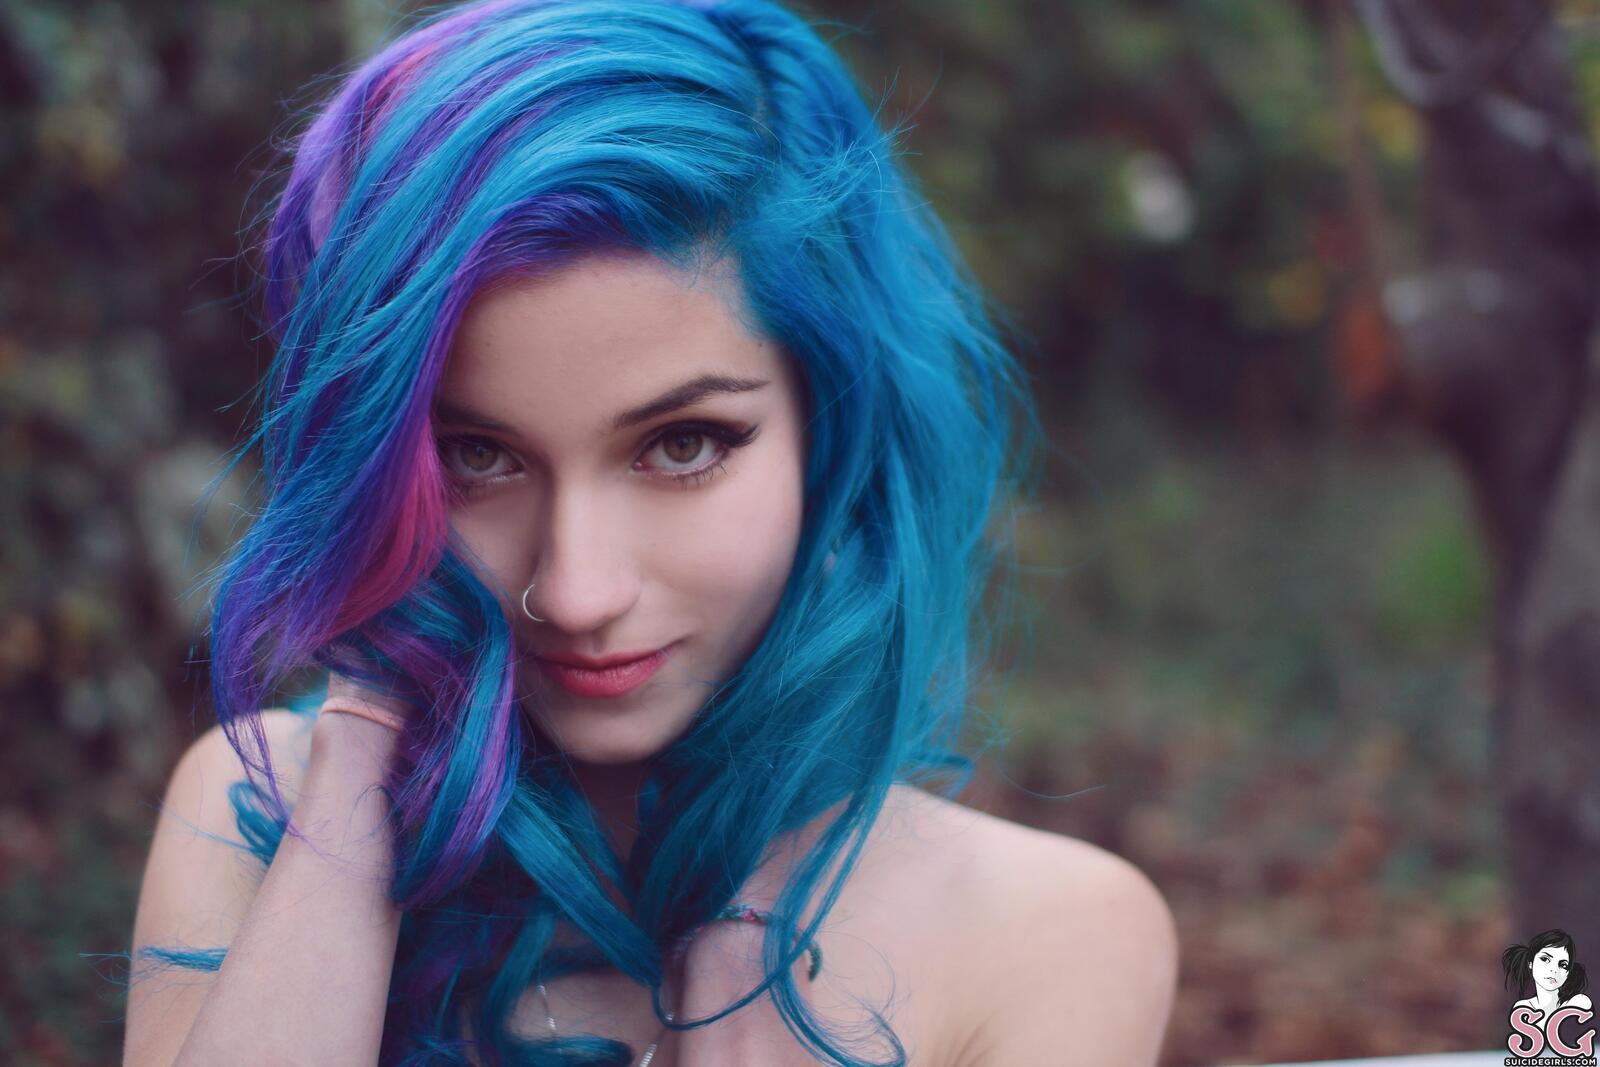 Free photo A girl with blue hair